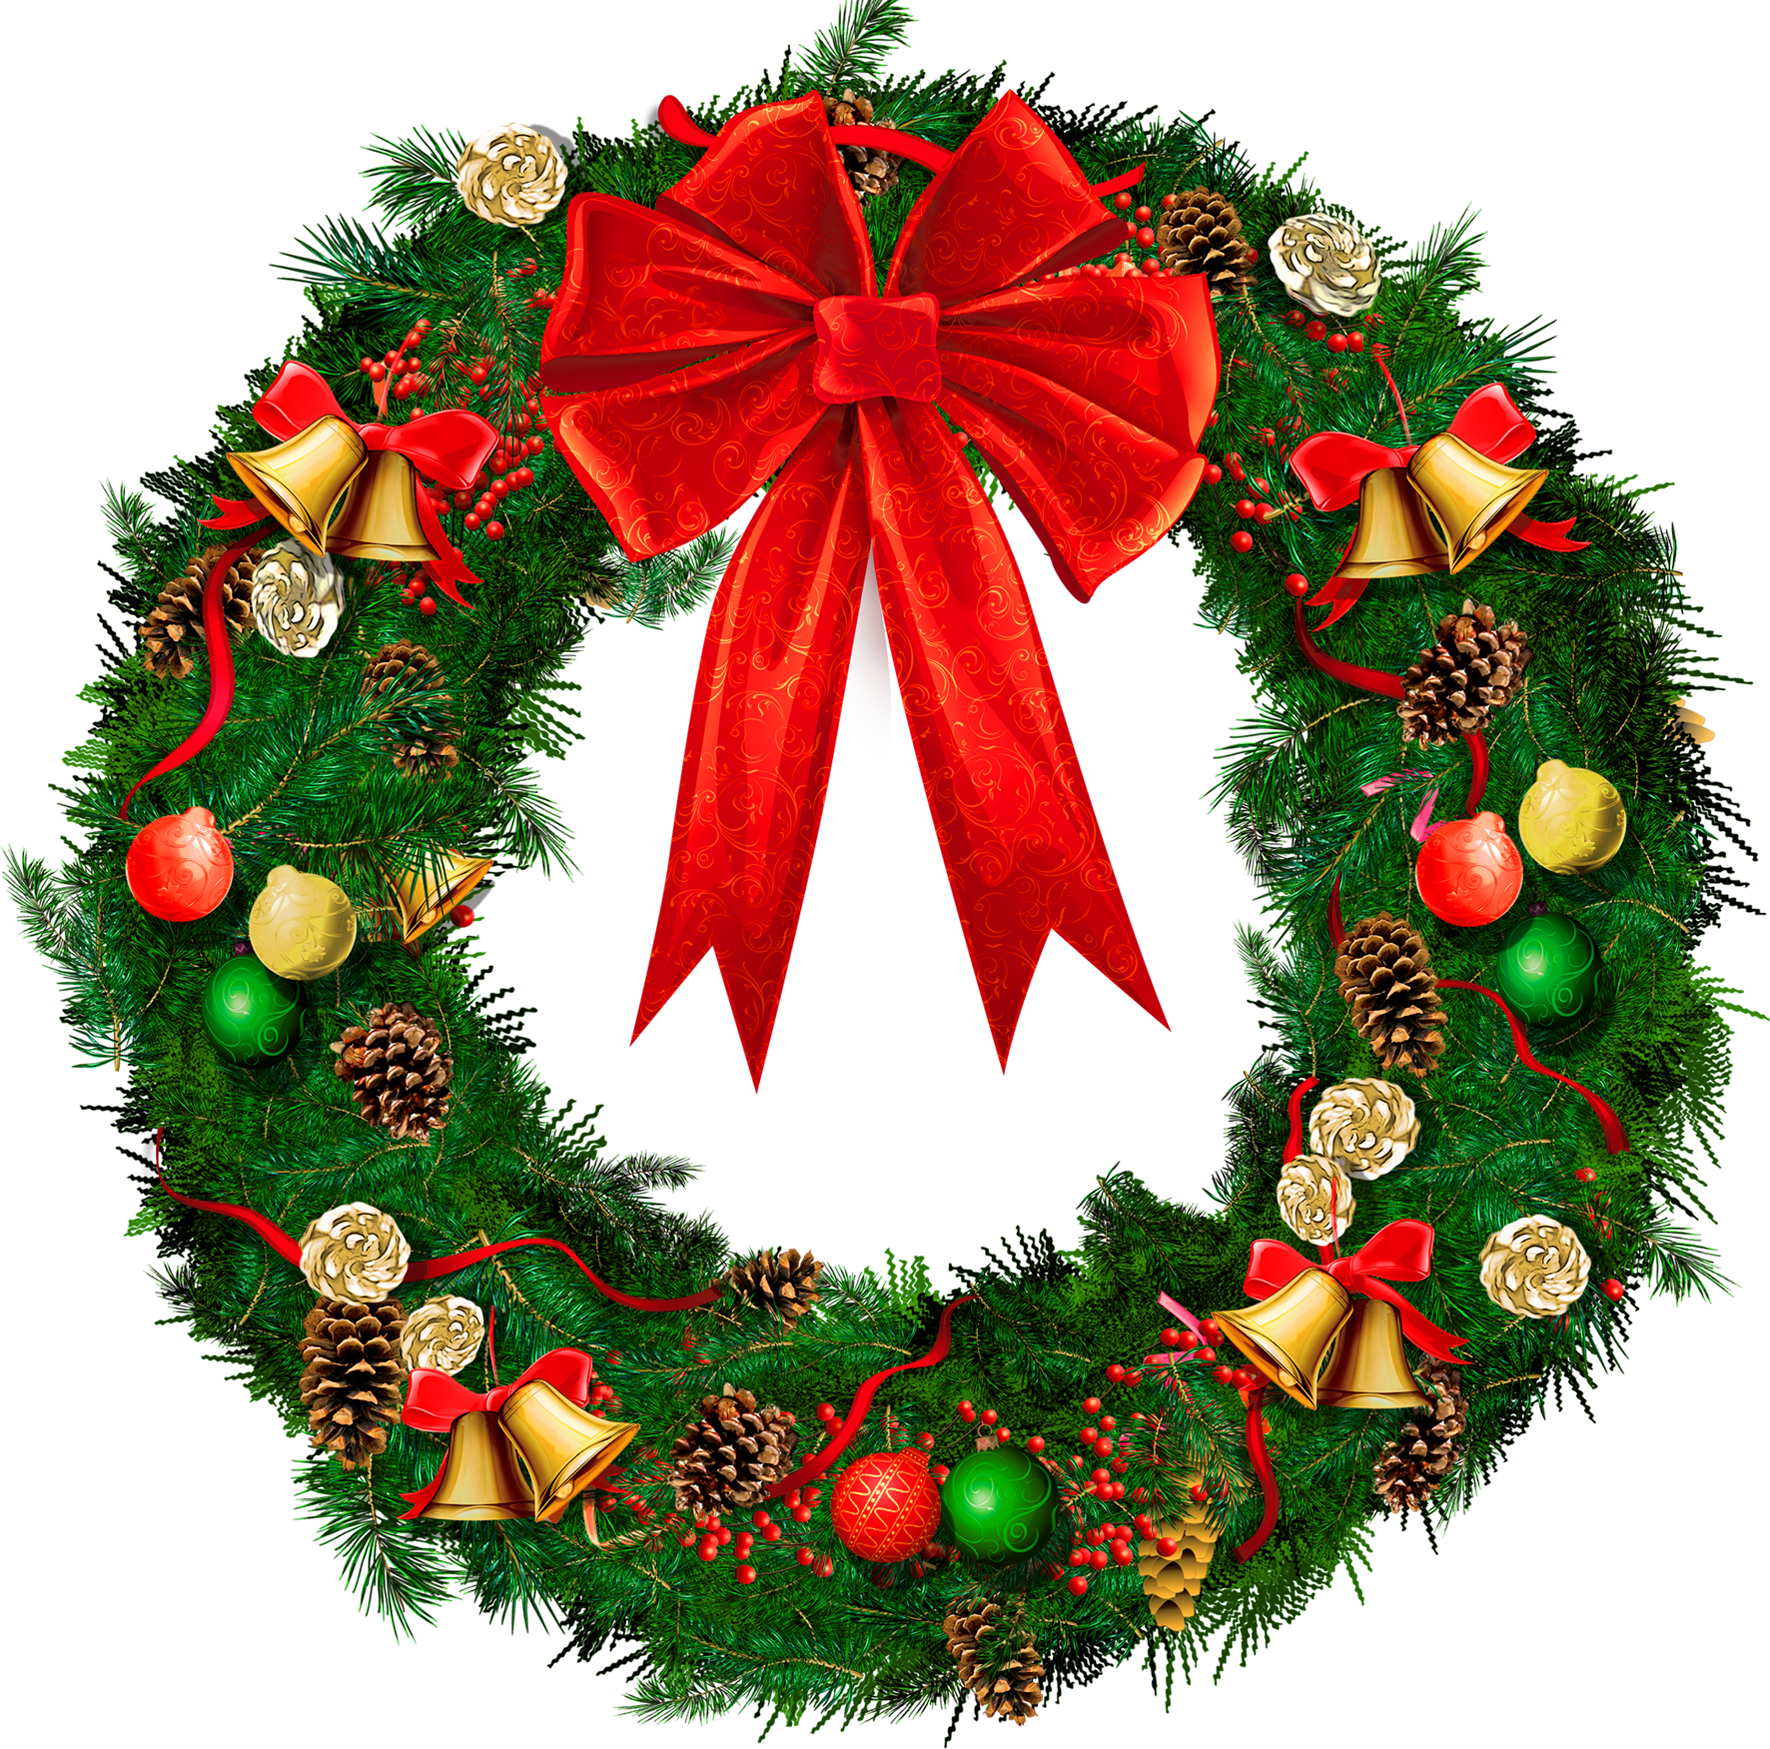 free clipart of christmas wreaths - photo #4